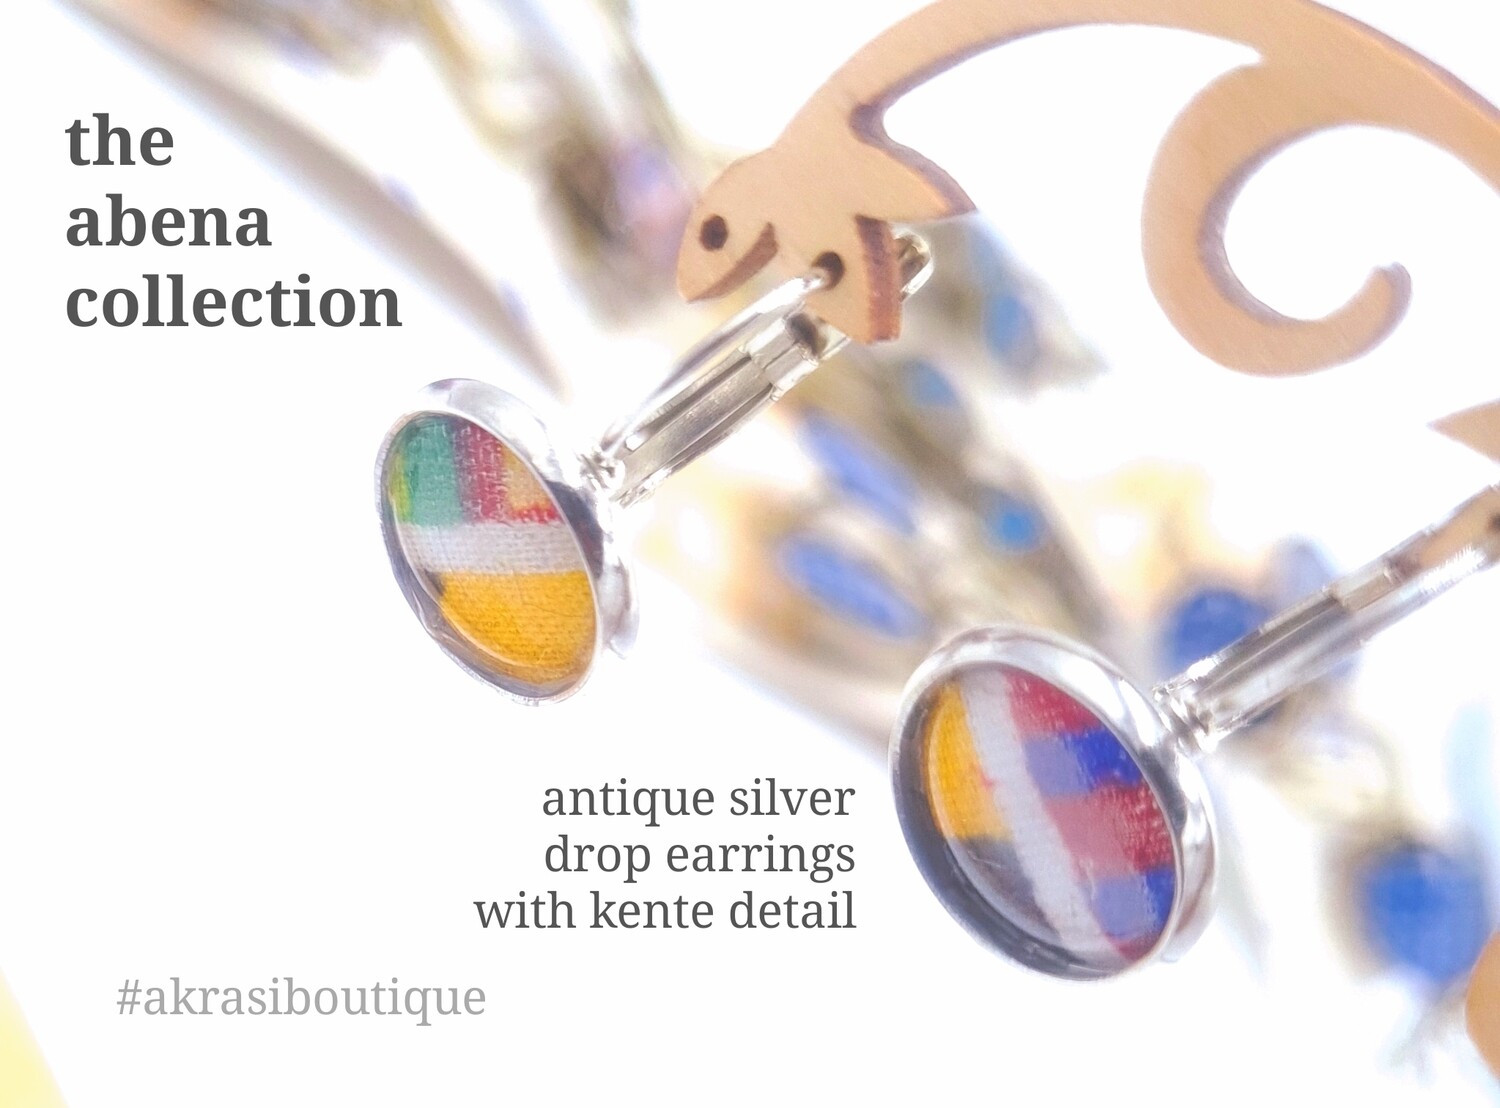 Kente collection round silver drop earrings